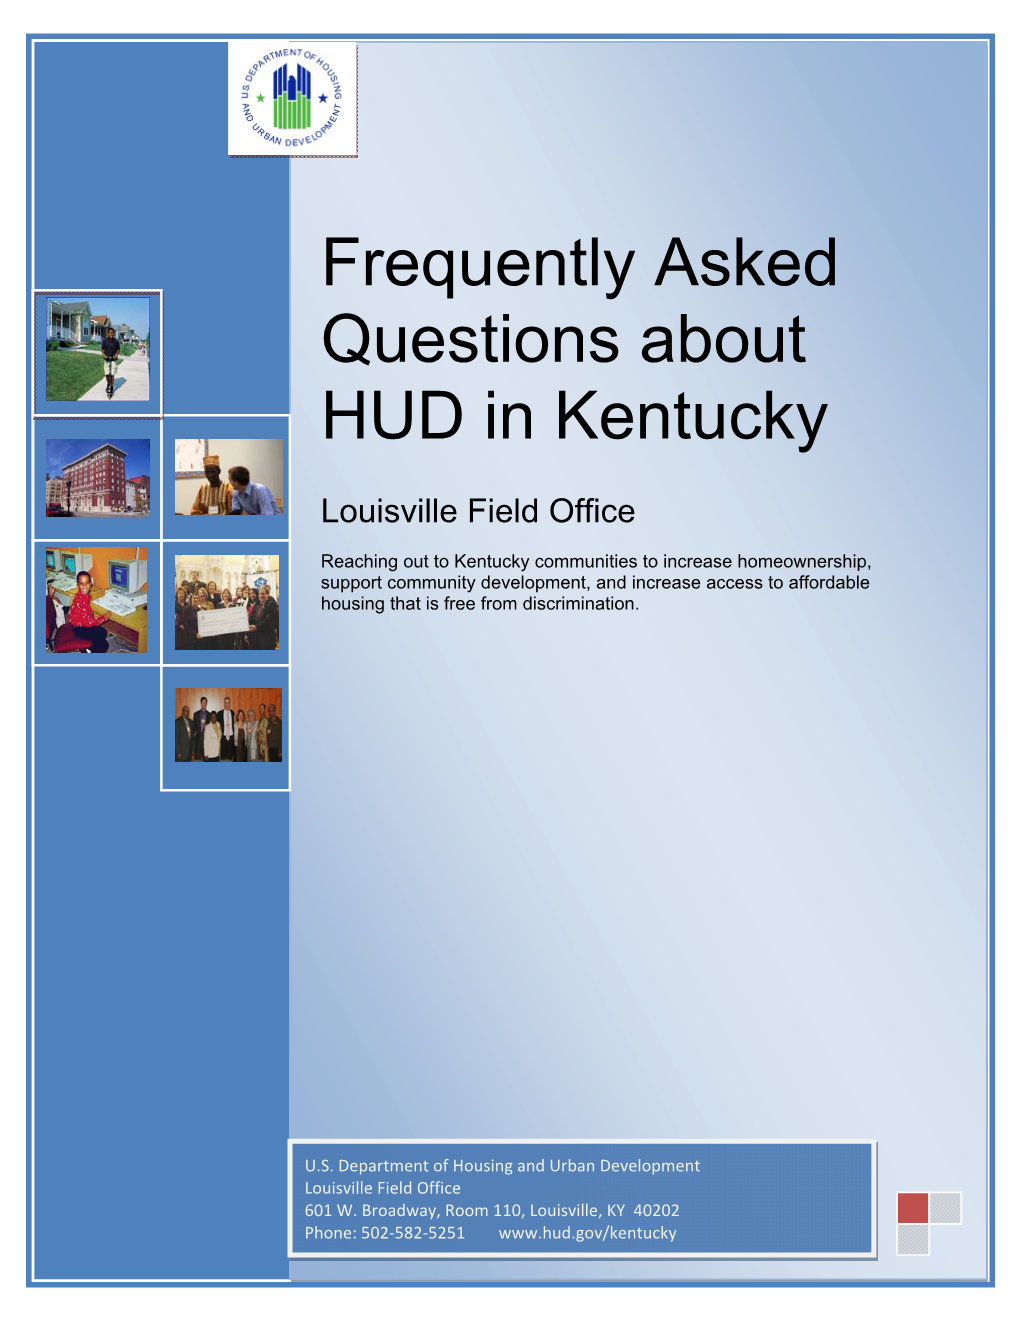 Frequently Asked Questions About HUD in Kentucky